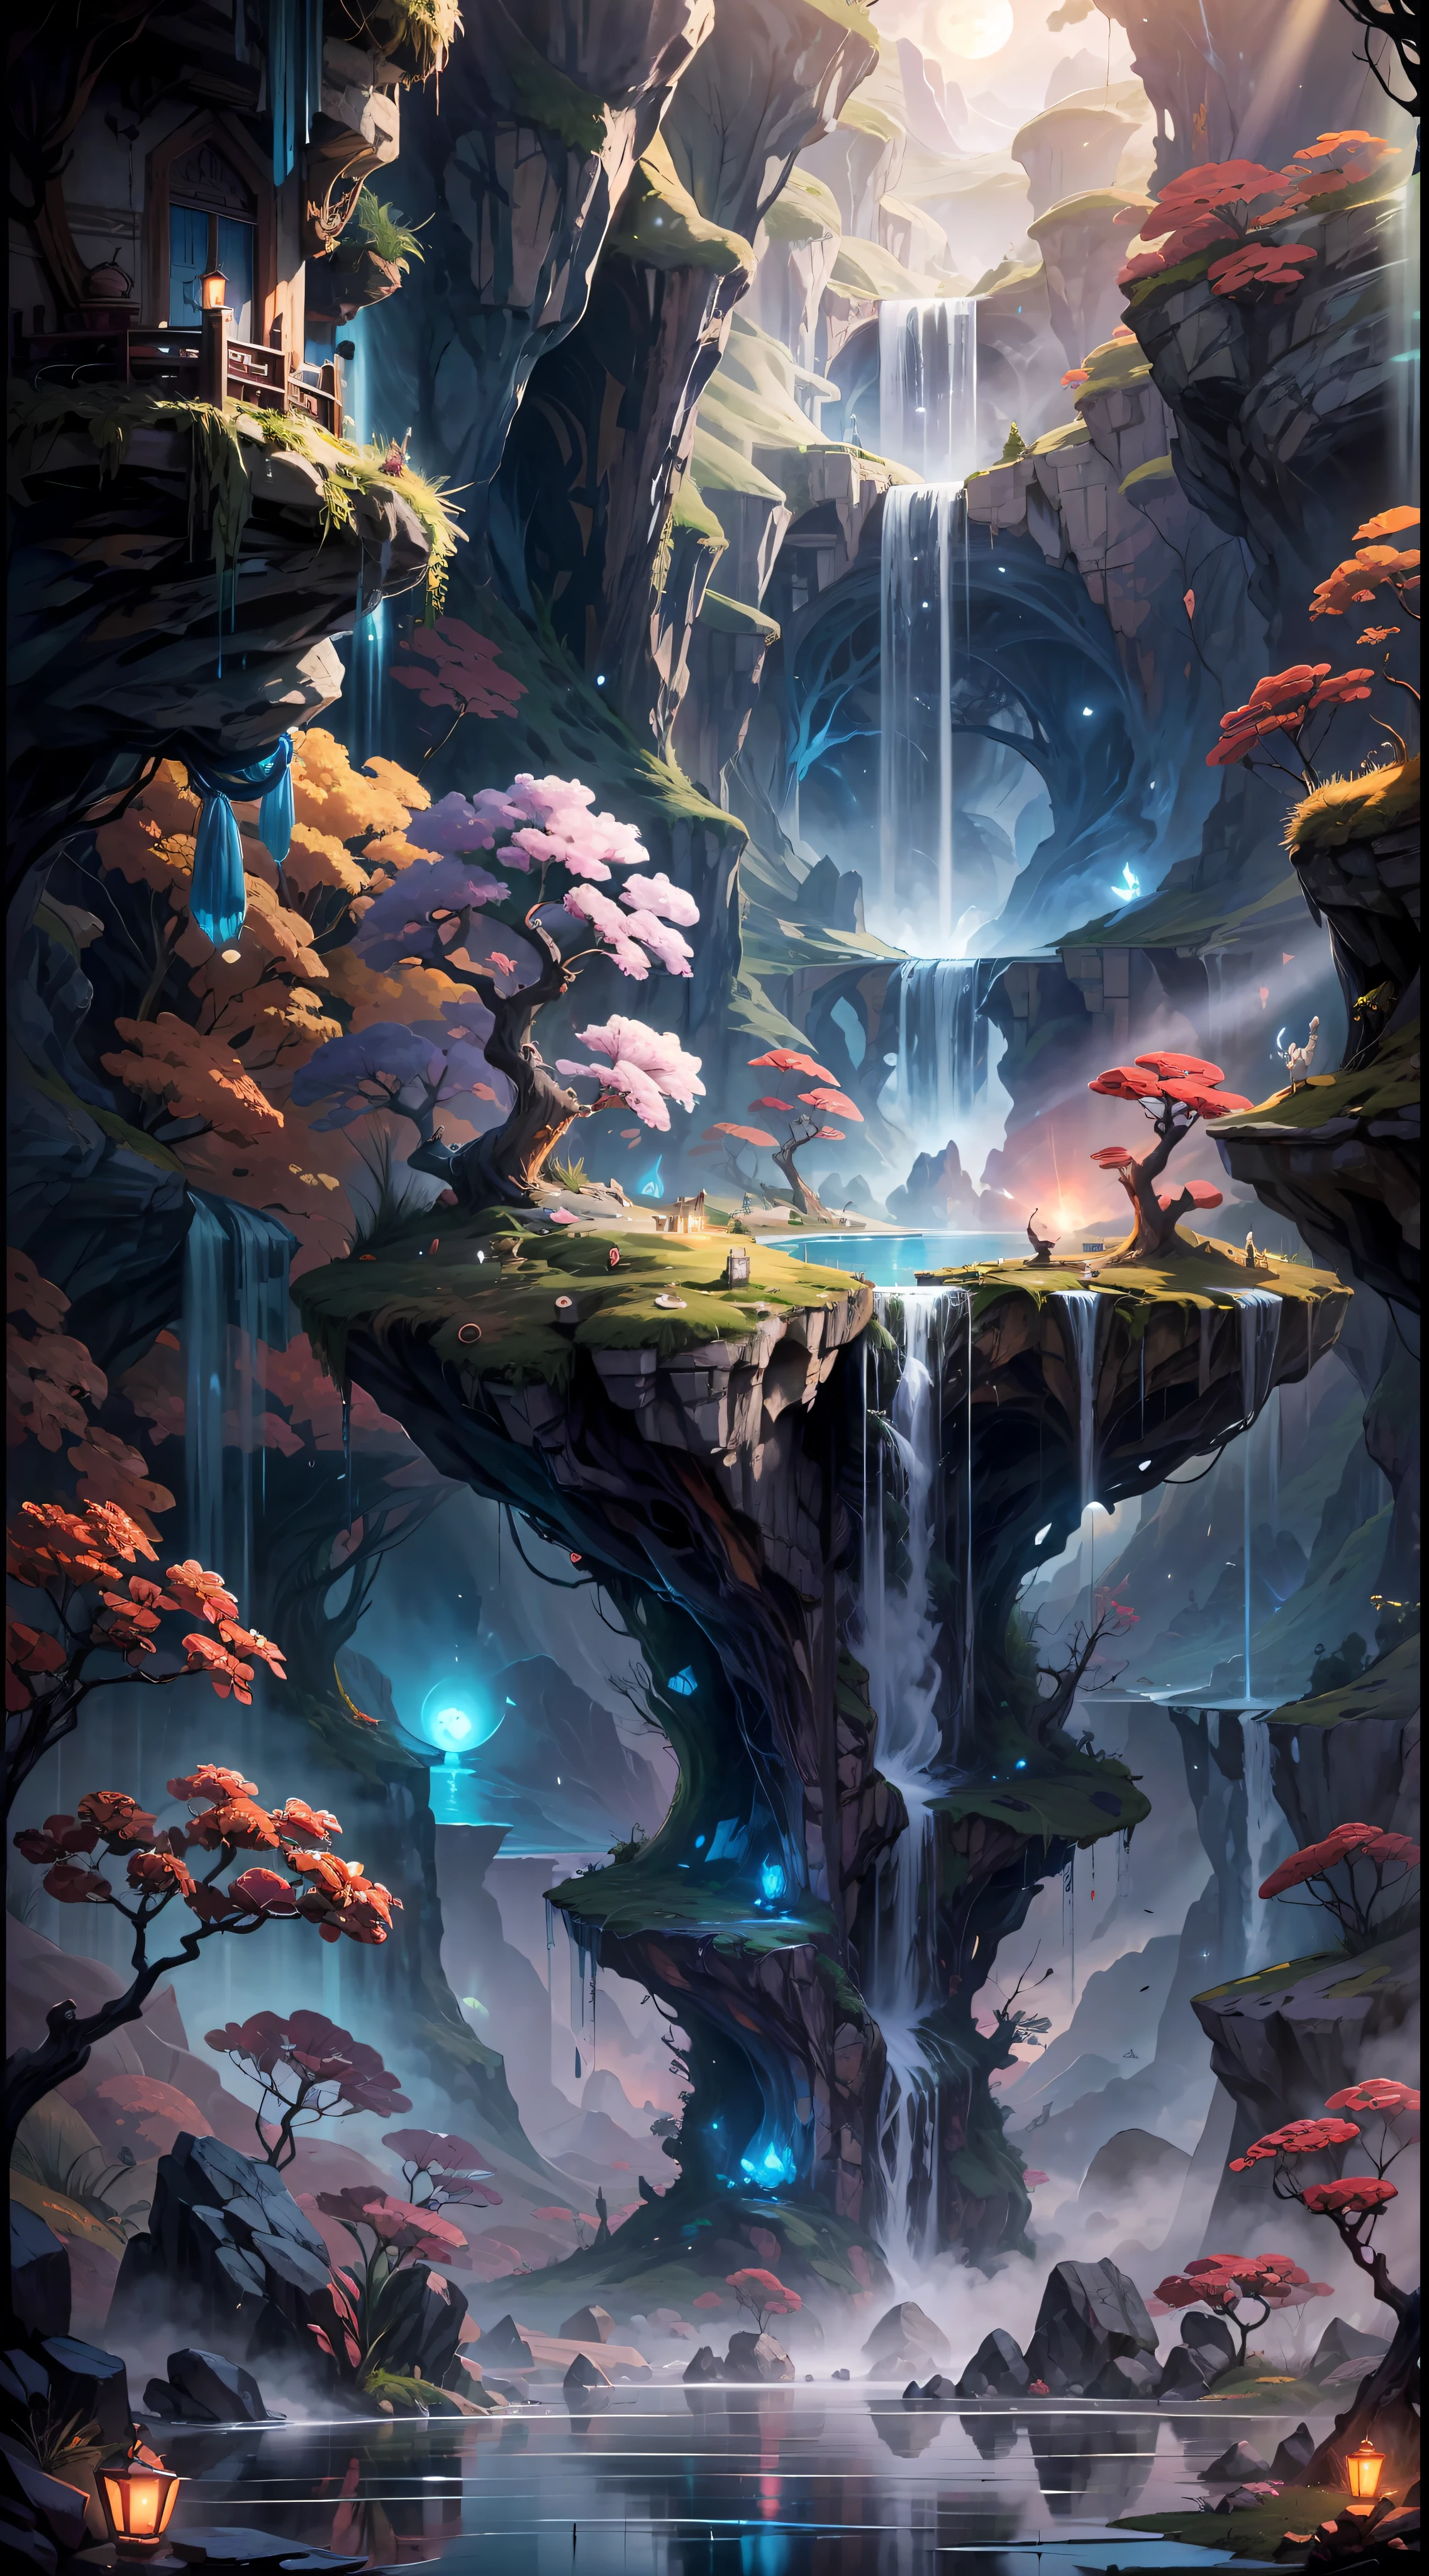 masterpiece, best quality, trending on artstation, The image portrays an otherworldly scenery that takes you on a magical journey to ancient fantasy China. In the center of the image, you see a magnificent waterfall cascading down from a towering cliff into a serene and tranquil pool below. The water sparkles with the reflection of the sun, creating a dazzling display of light. Above the waterfall, you see a series of floating islands, each one seeming to defy the laws of gravity and physics BREAK These islands are adorned with intricate details, with pagoda-style roofs, ornate bridges, and lush gardens. The sky above is a tapestry of colors, with hues of pink, orange and purple that blend together in a stunning display of natural artistry. You also see hints of magic, with glowing orbs of light floating in the air, and intricate symbols etched into the rocks surrounding the waterfall BREAK The overall effect of the image is one of serene beauty and mystical wonder, transporting the viewer to a fantastical land that seems to exist only in the realm of dreams and imagination.